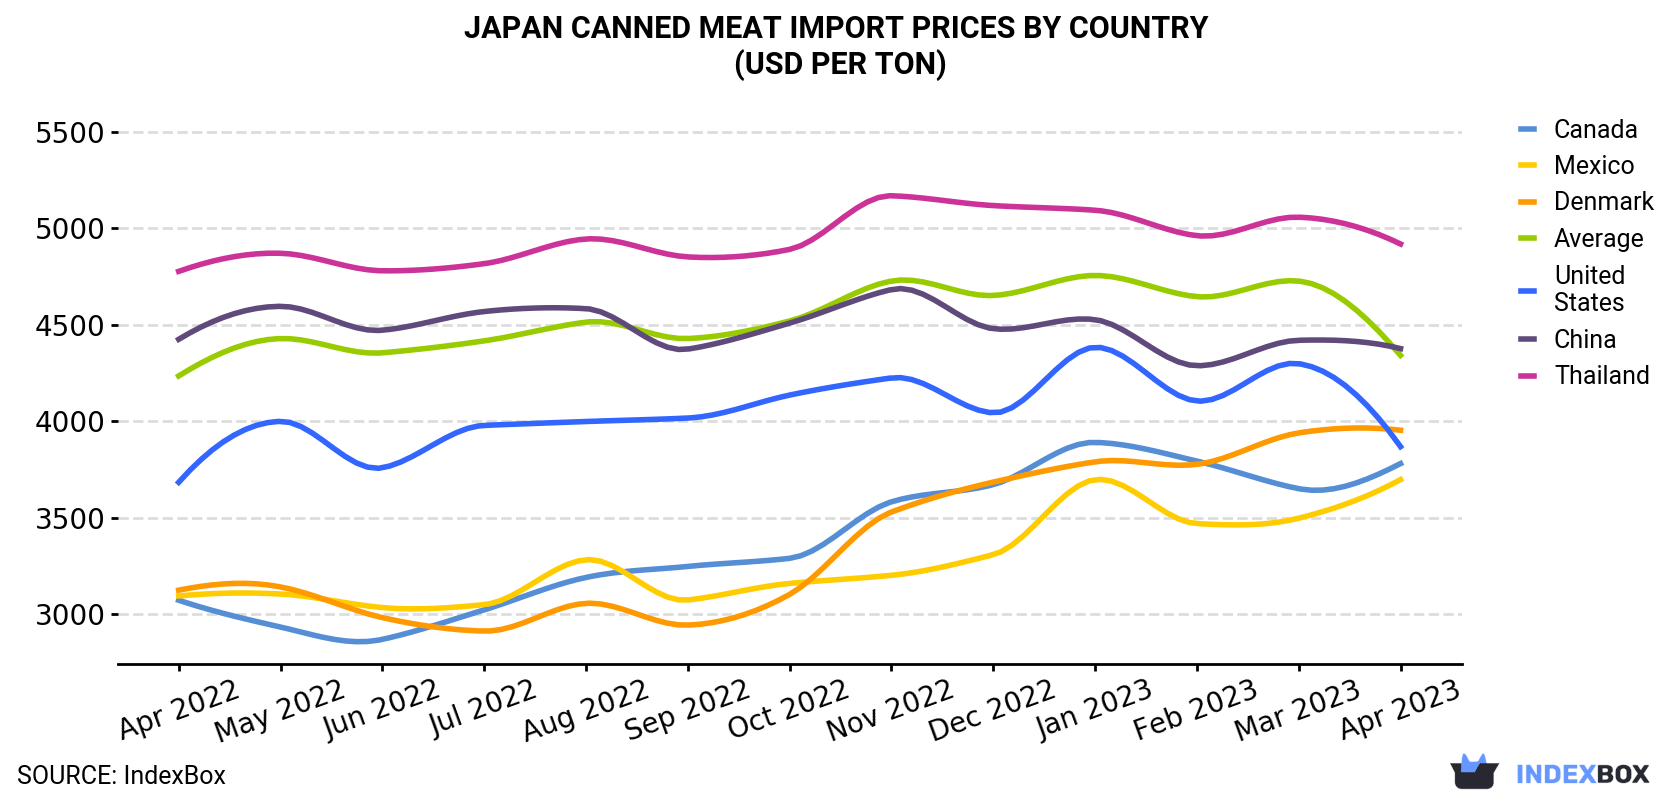 Japan Canned Meat Import Prices By Country (USD Per Ton)